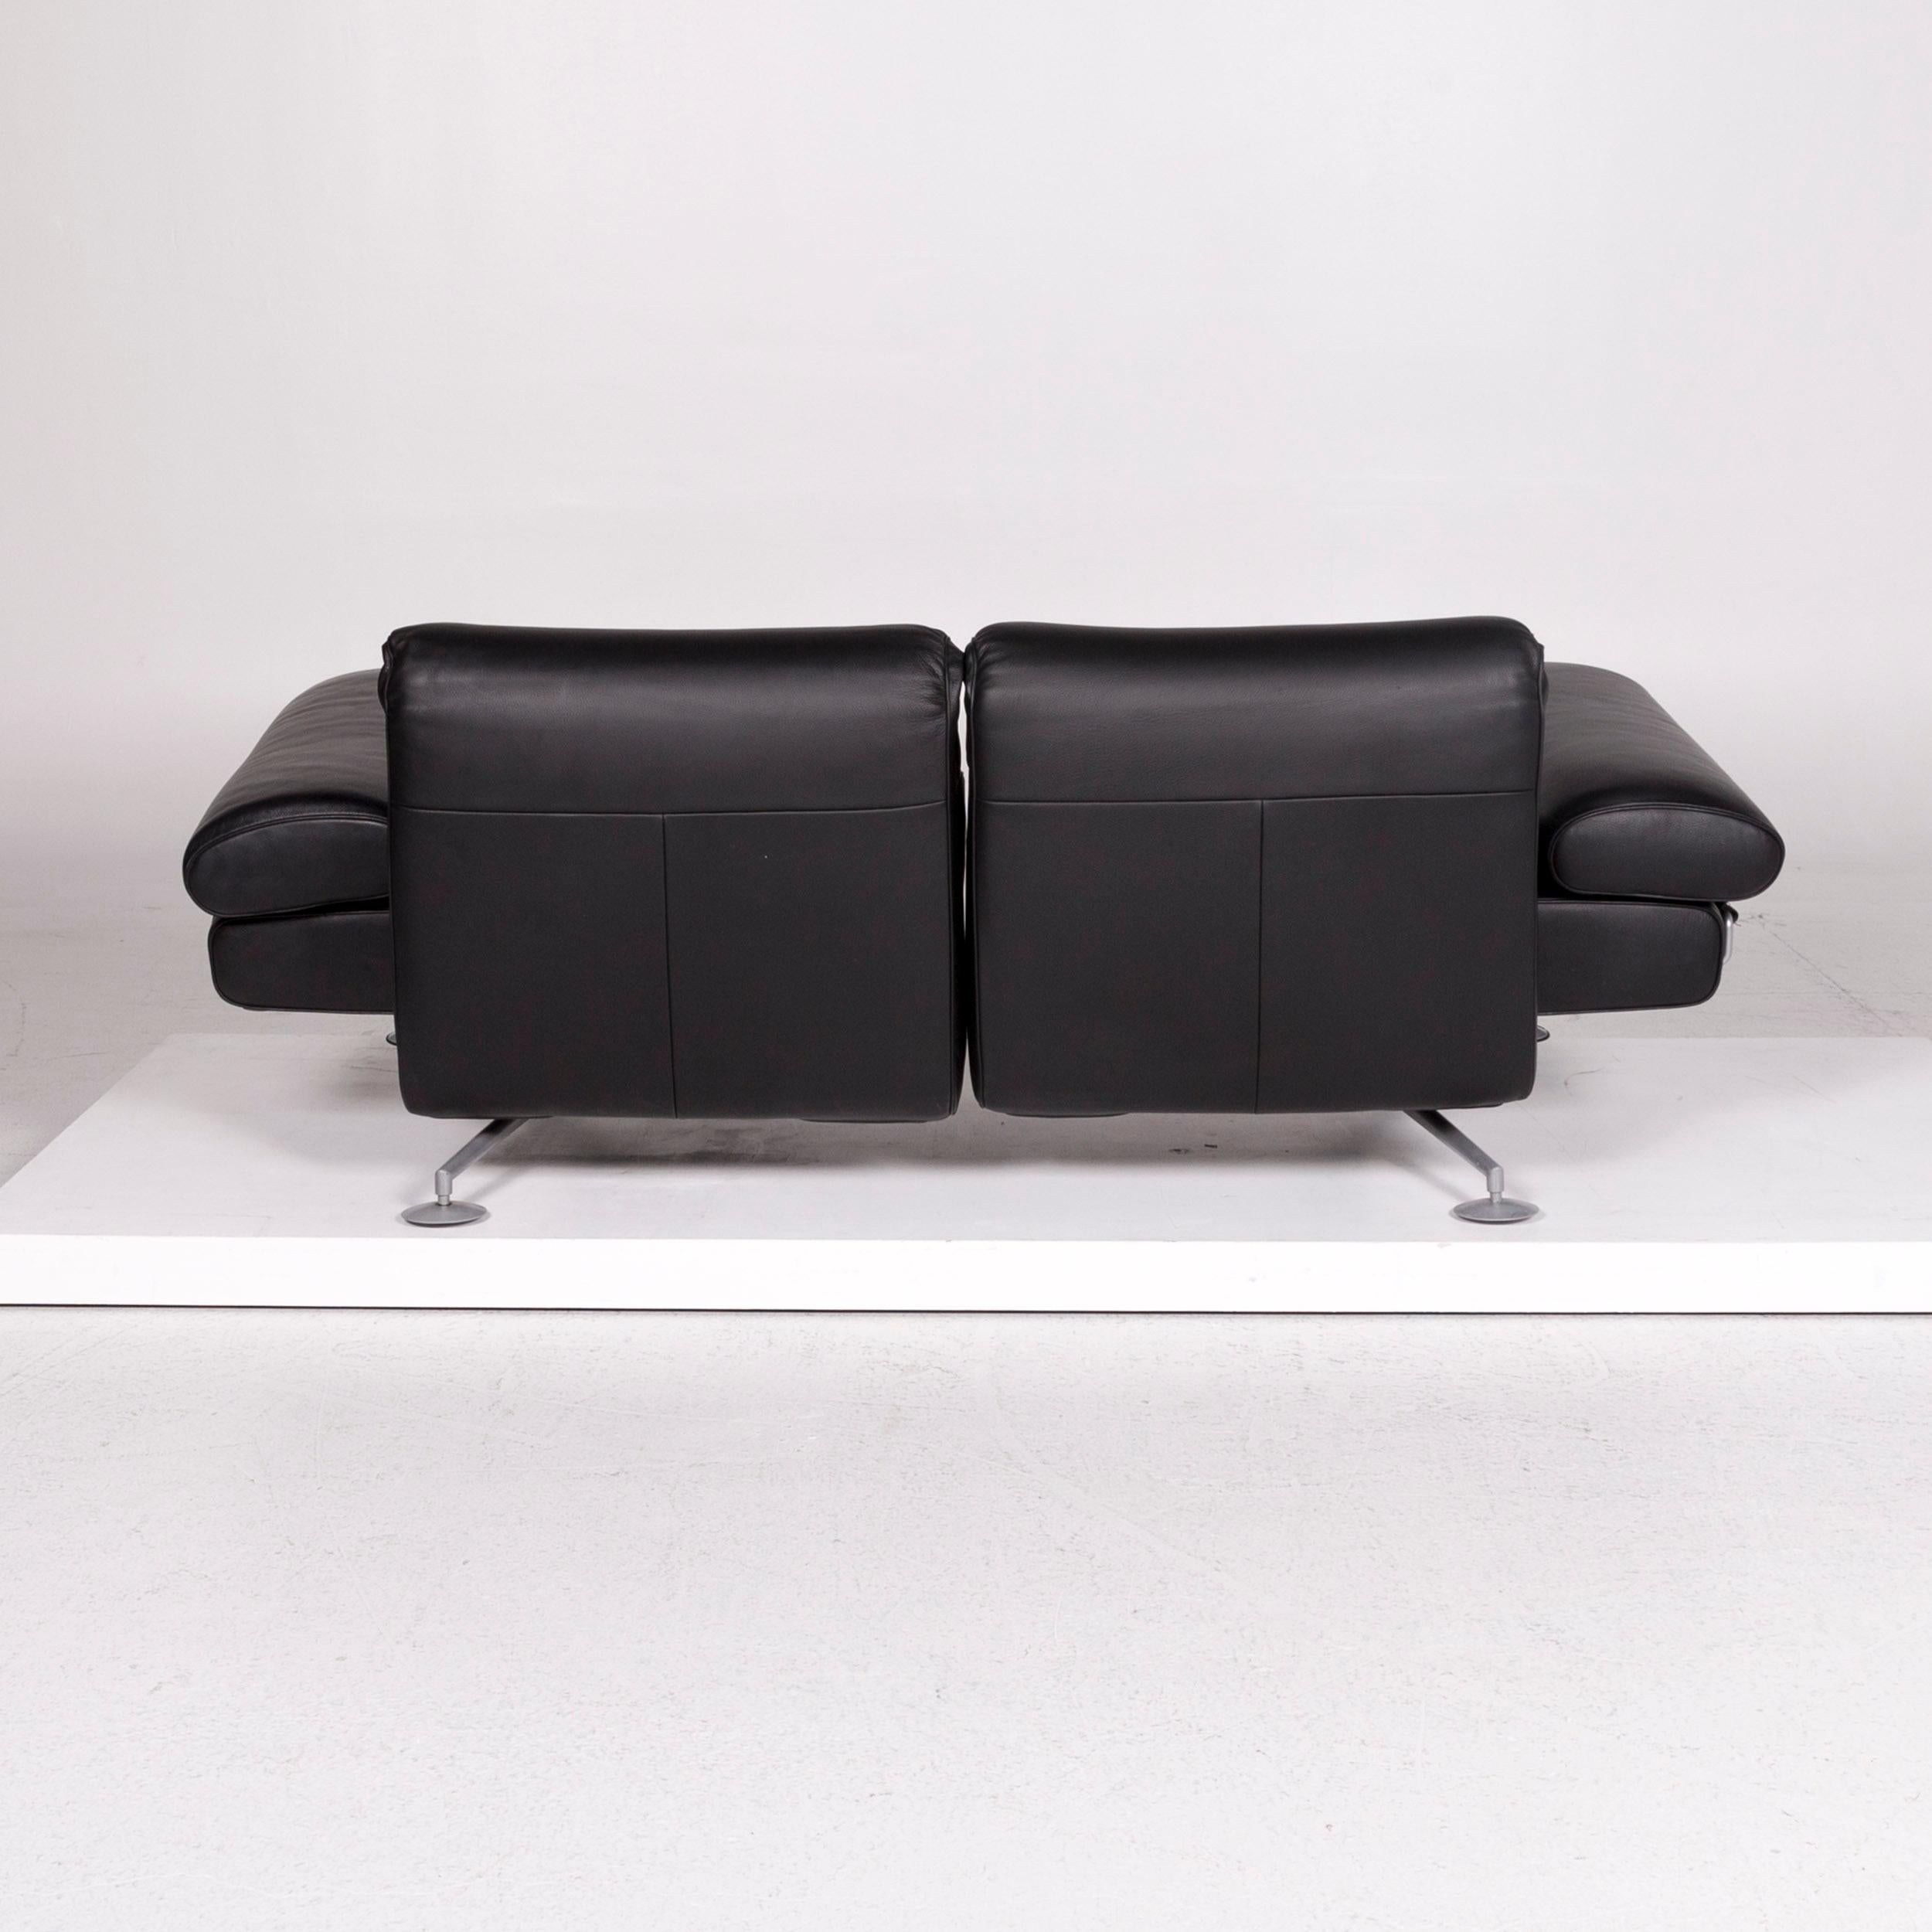 De Sede Ds 470 Leather Sofa Black Two-Seat Function Relax Function Couch 2